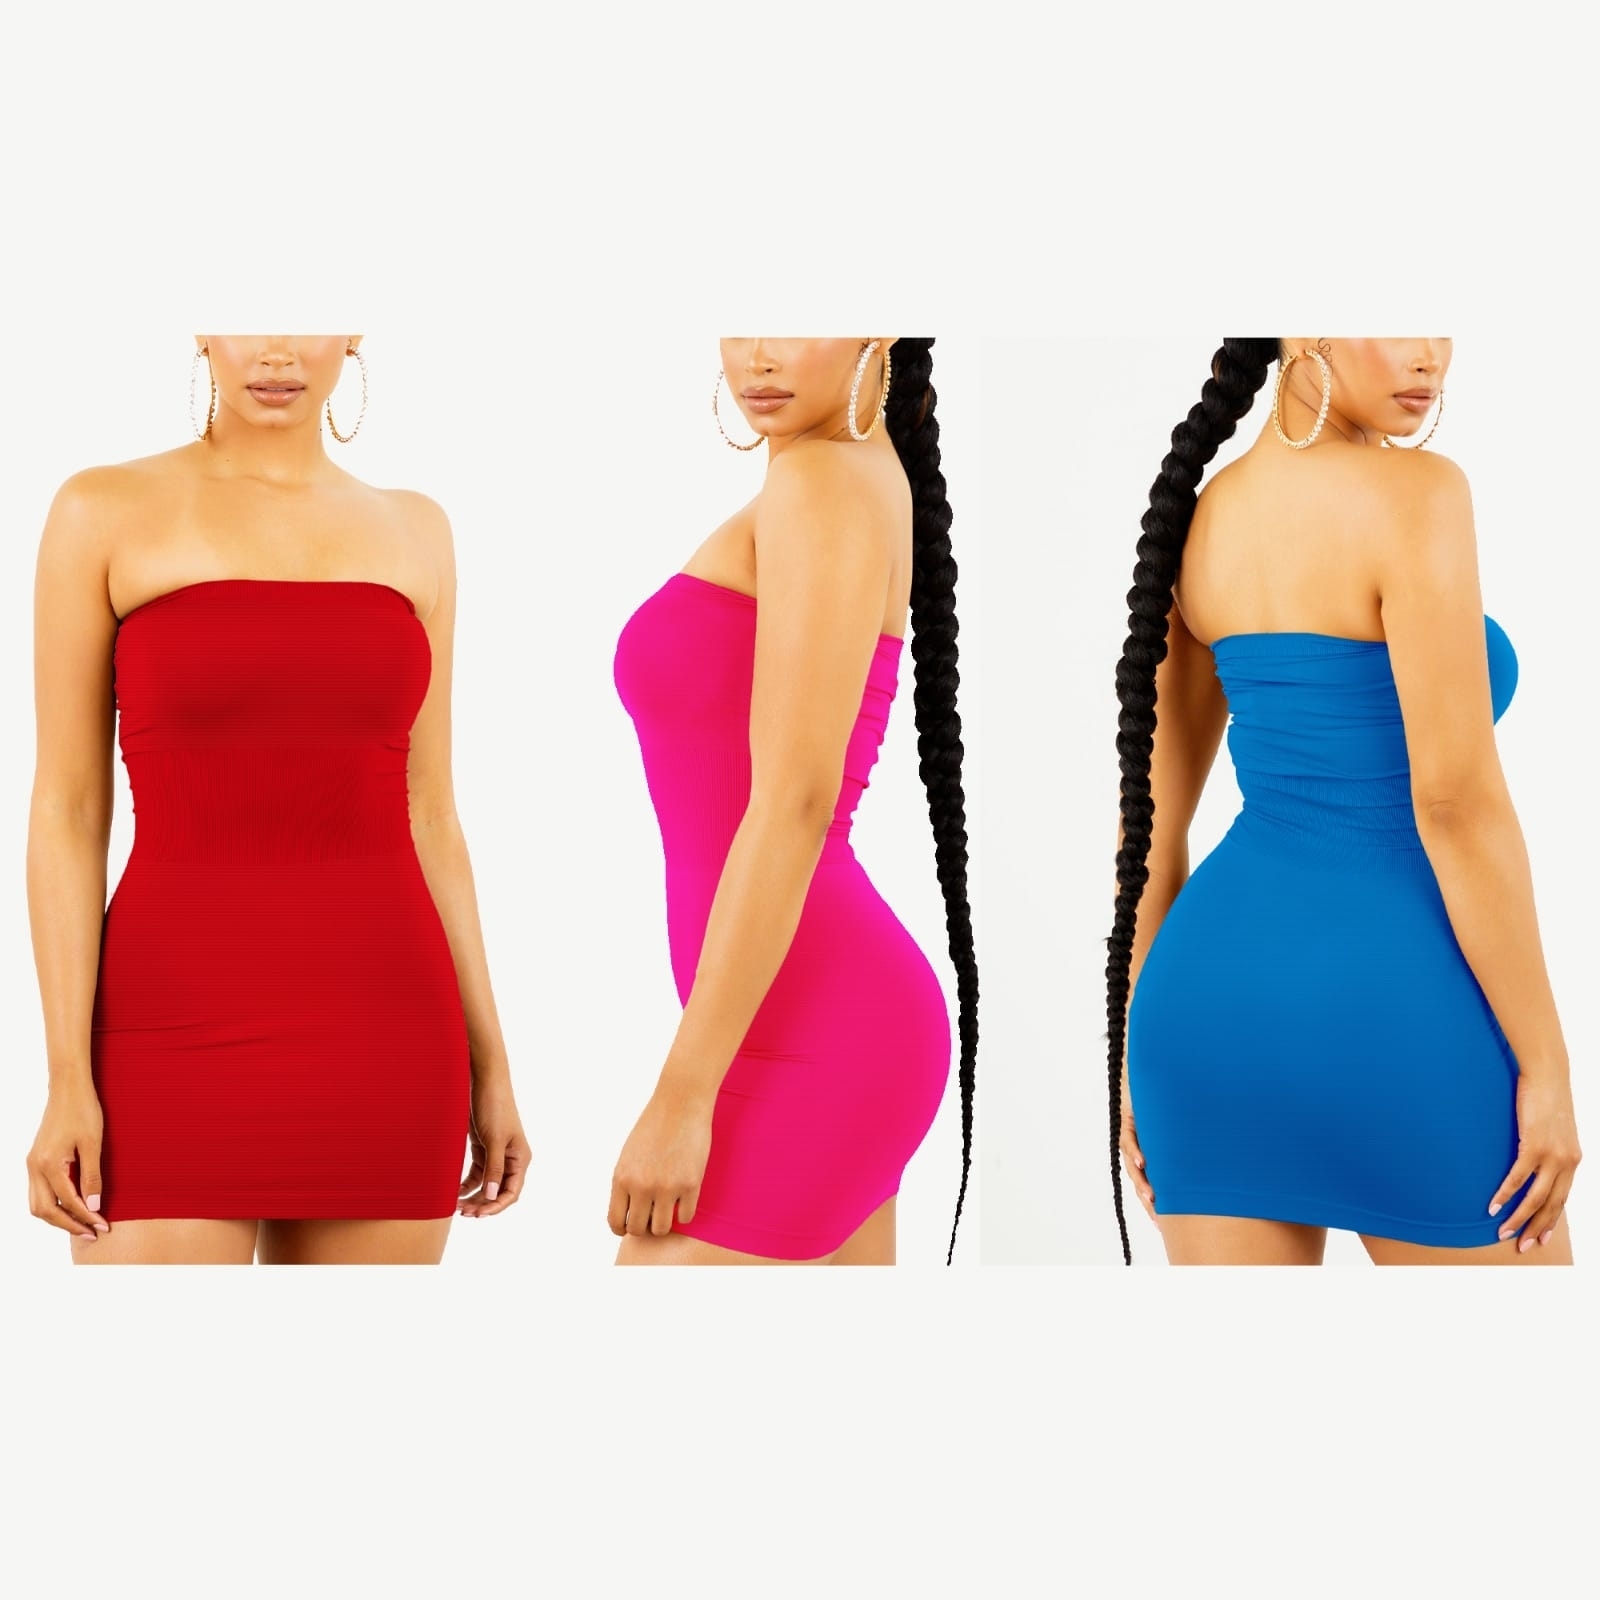 2-Pack Women's Strapless Stretchy Tight Fit Seamless Body Con Mini Tube Top Dress - BLUE, XL